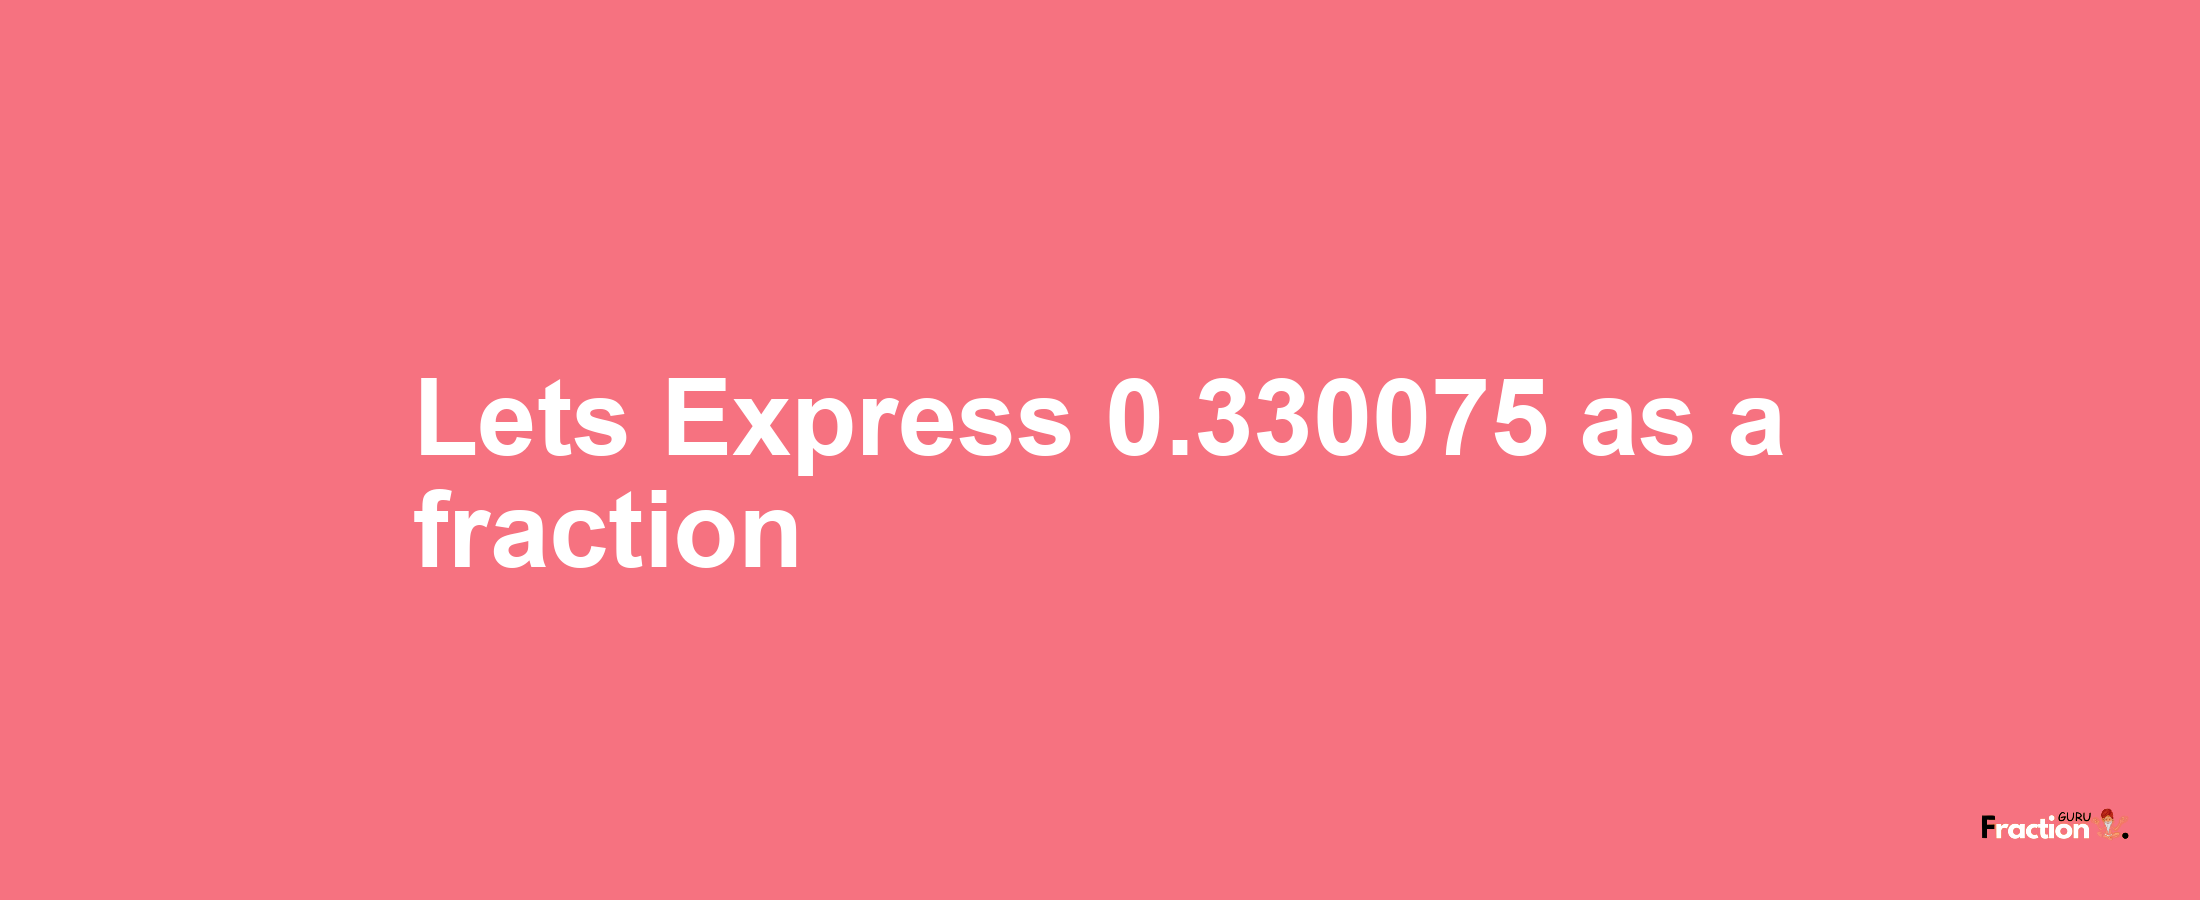 Lets Express 0.330075 as afraction